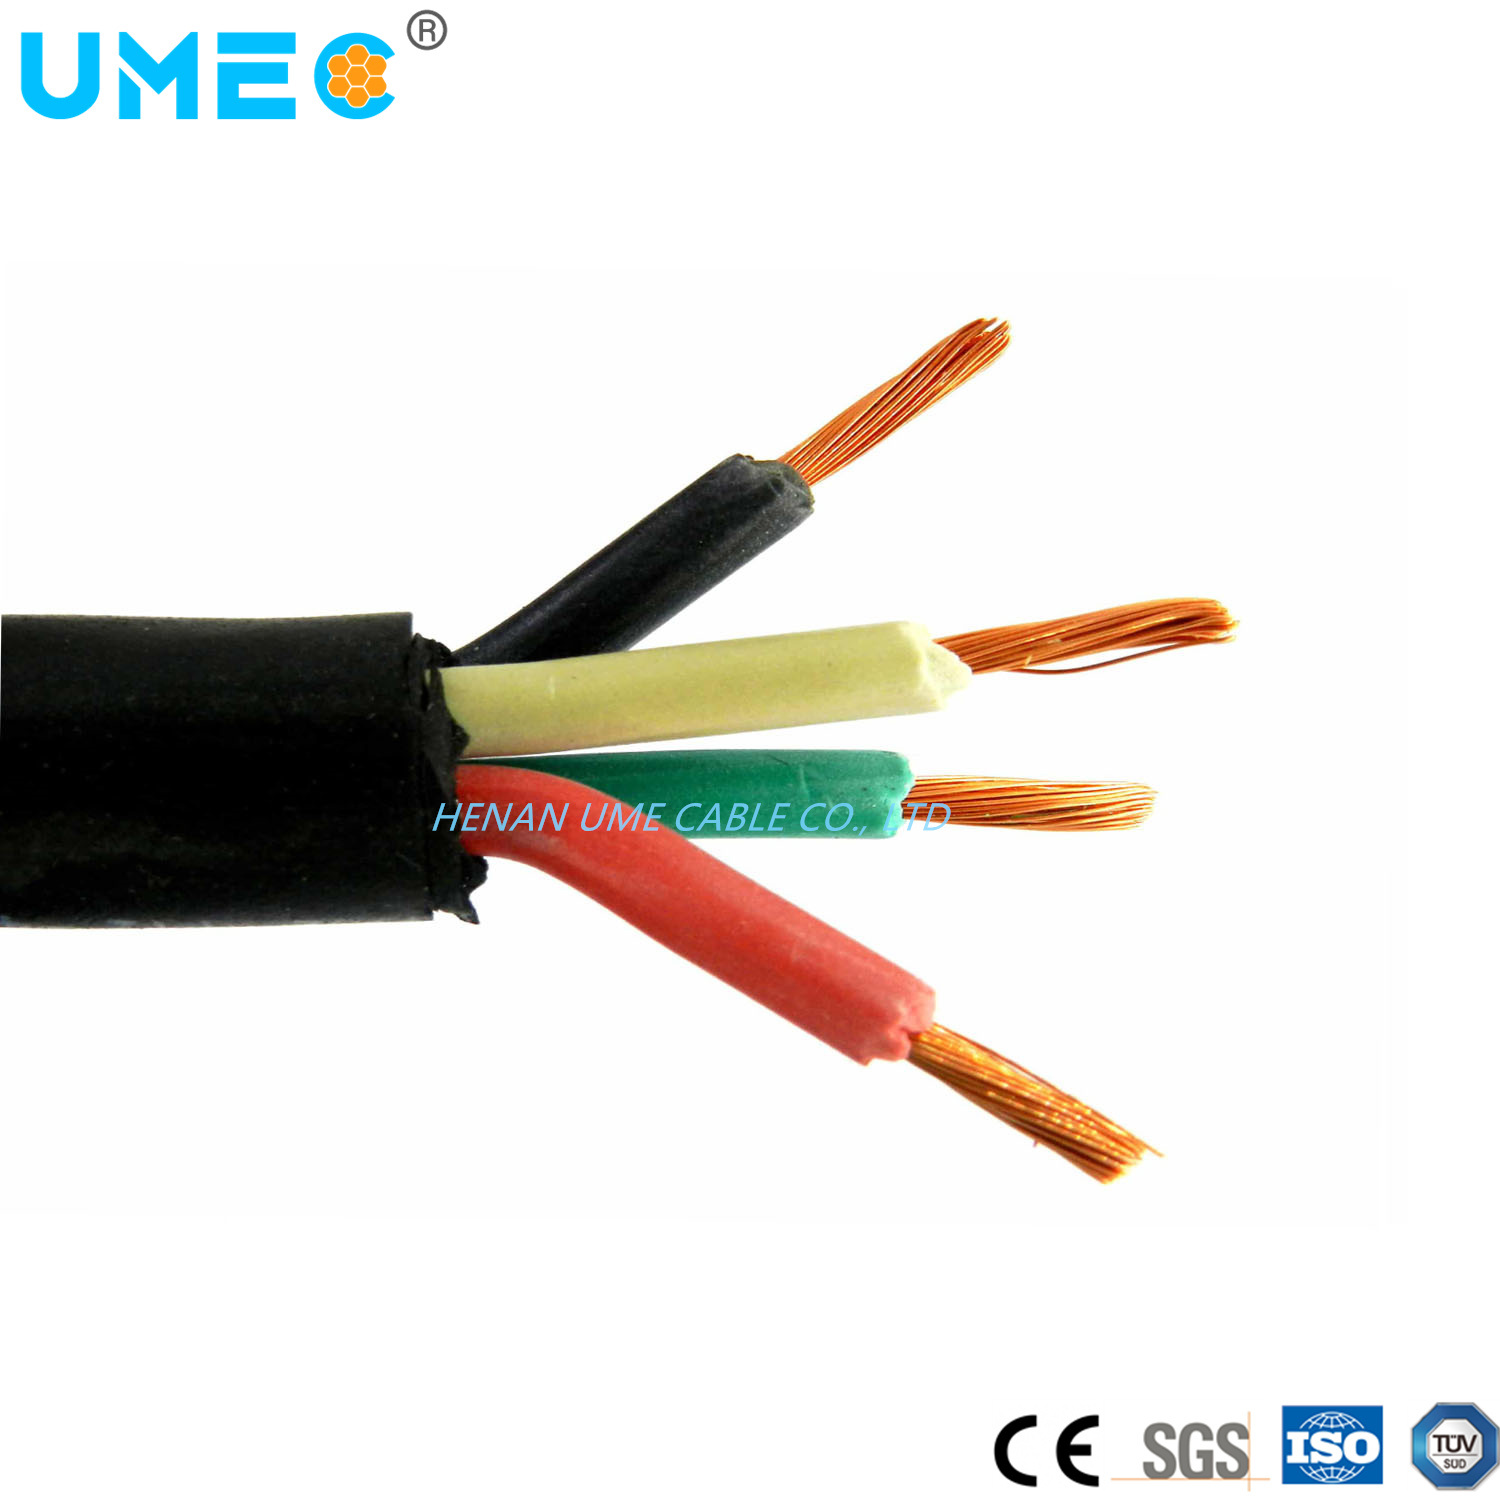 Hot Sale So Sow Soow Sjoow Rubber Cable Heavy Duty General CPE Epr Rubber Mining Trailing Cable Price